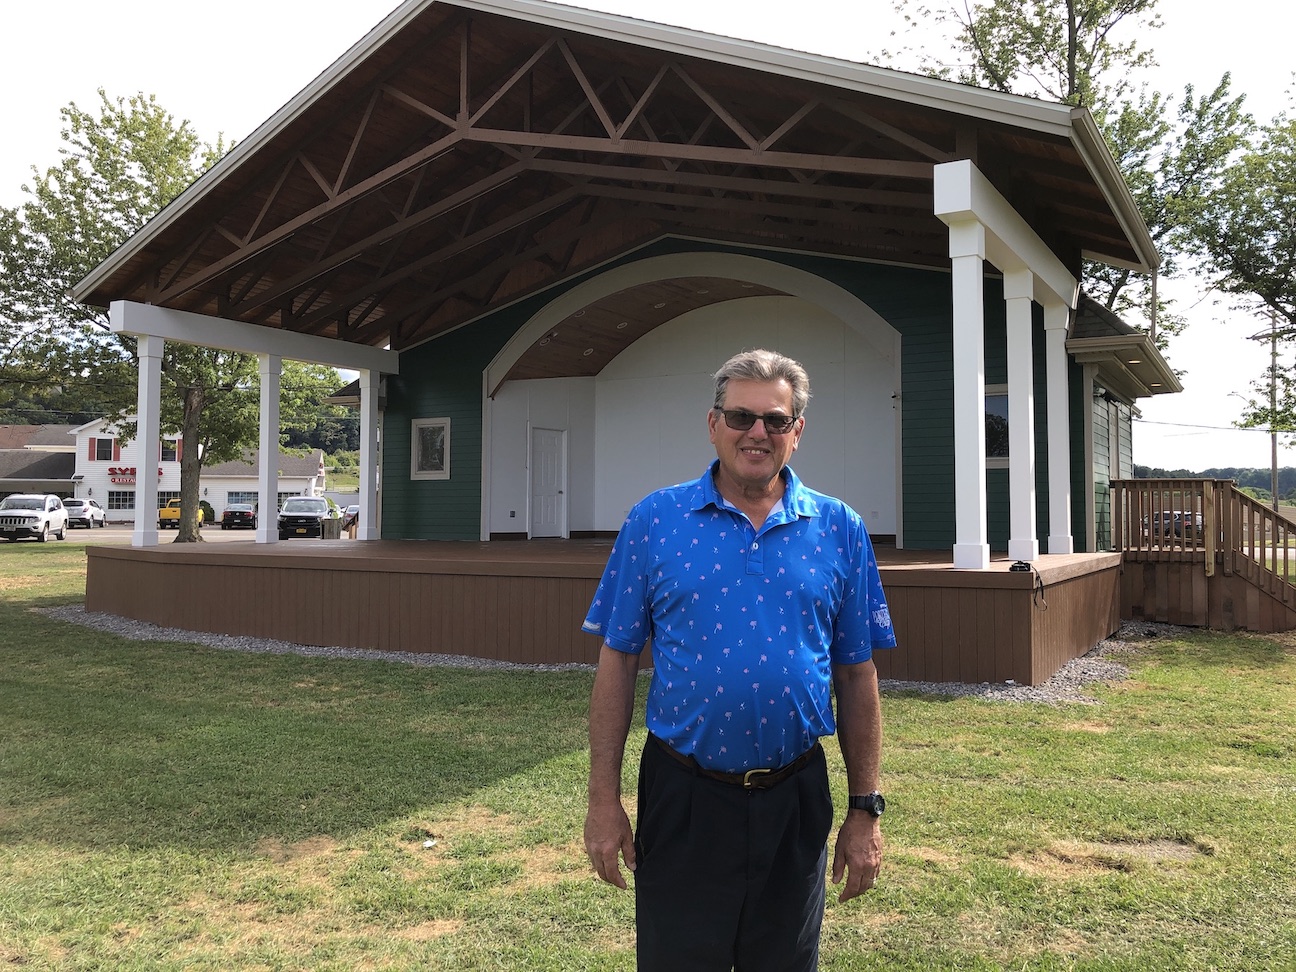 Anthony DiMino stands in front of the new Alphonso DiMino Memorial Bandshell at Academy Park in Lewiston.